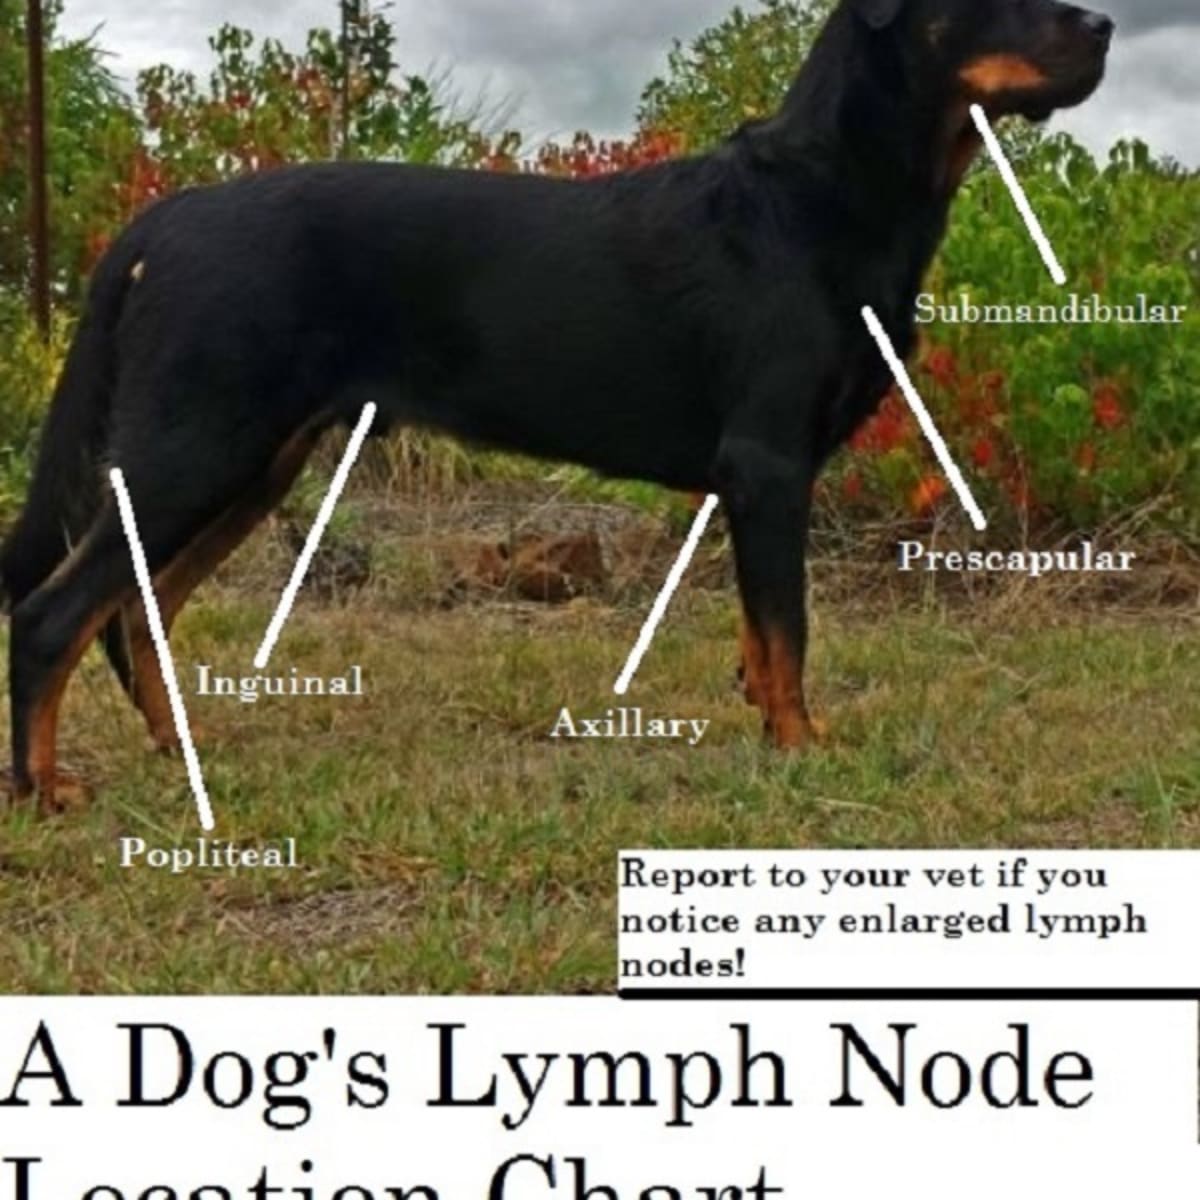 What Causes Swollen Lymph Nodes In Dogs